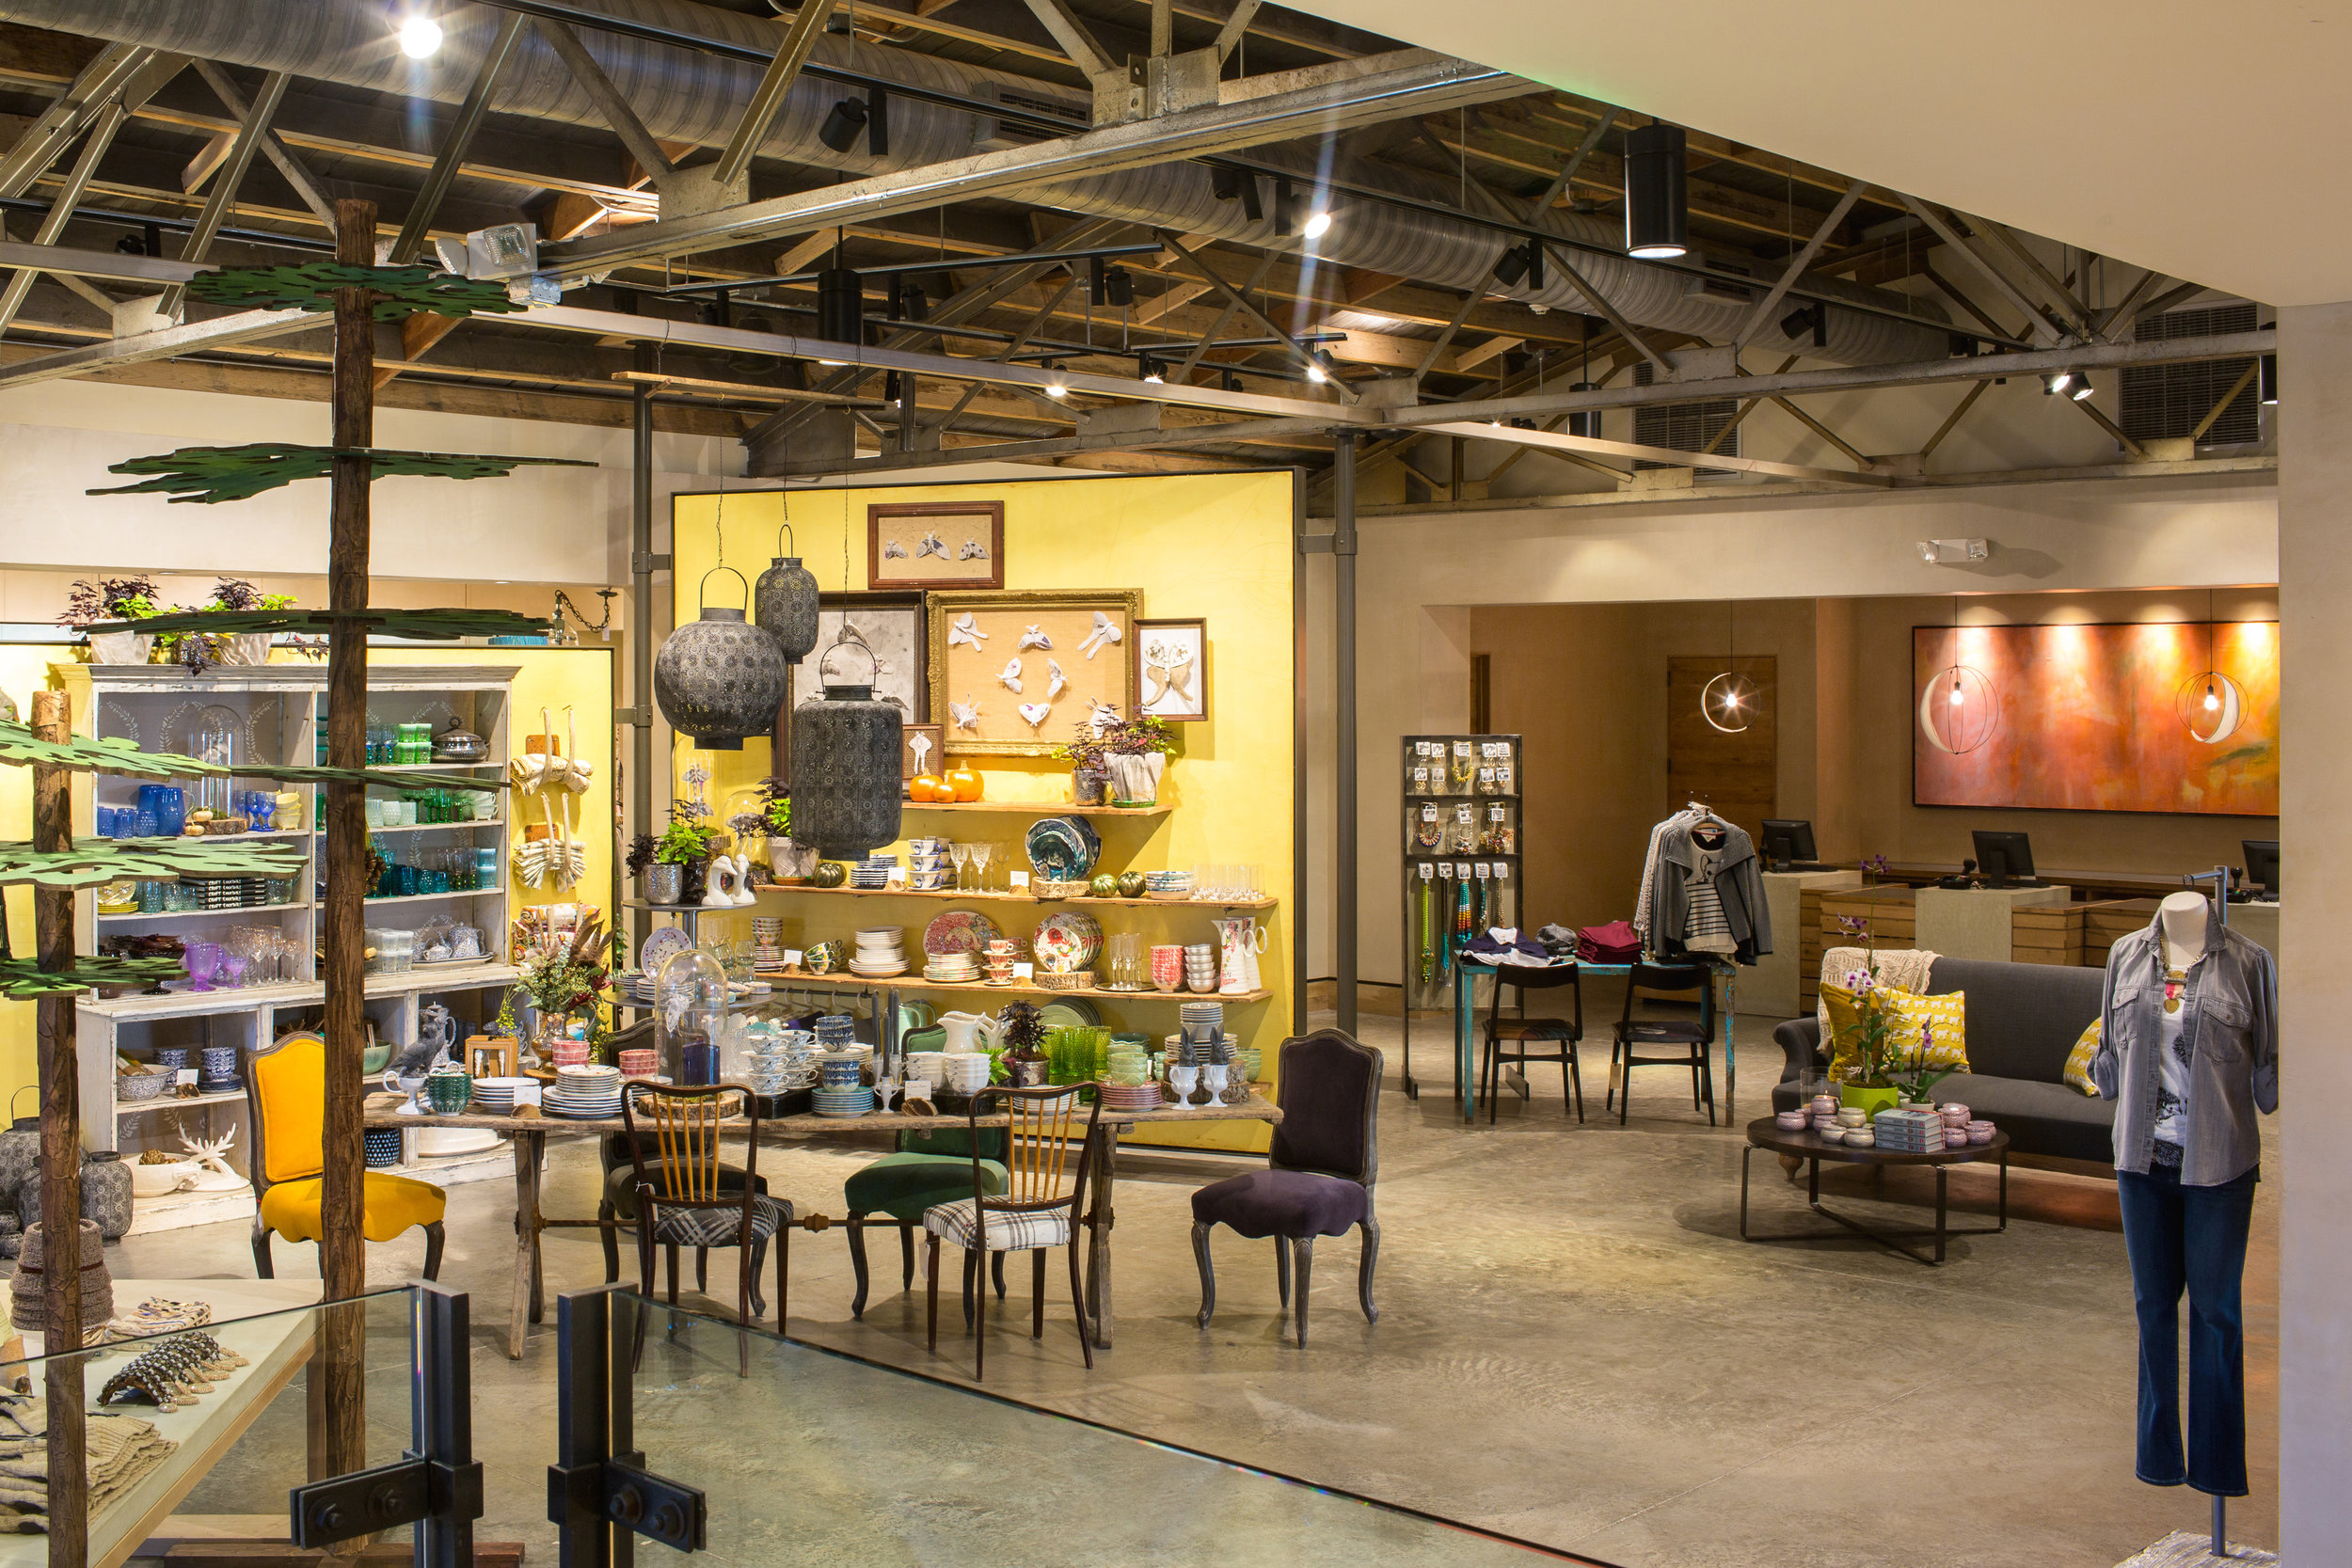 Interior retail area of Anthropologie in Knoxville, created in collaboration with NewStudio Architecture